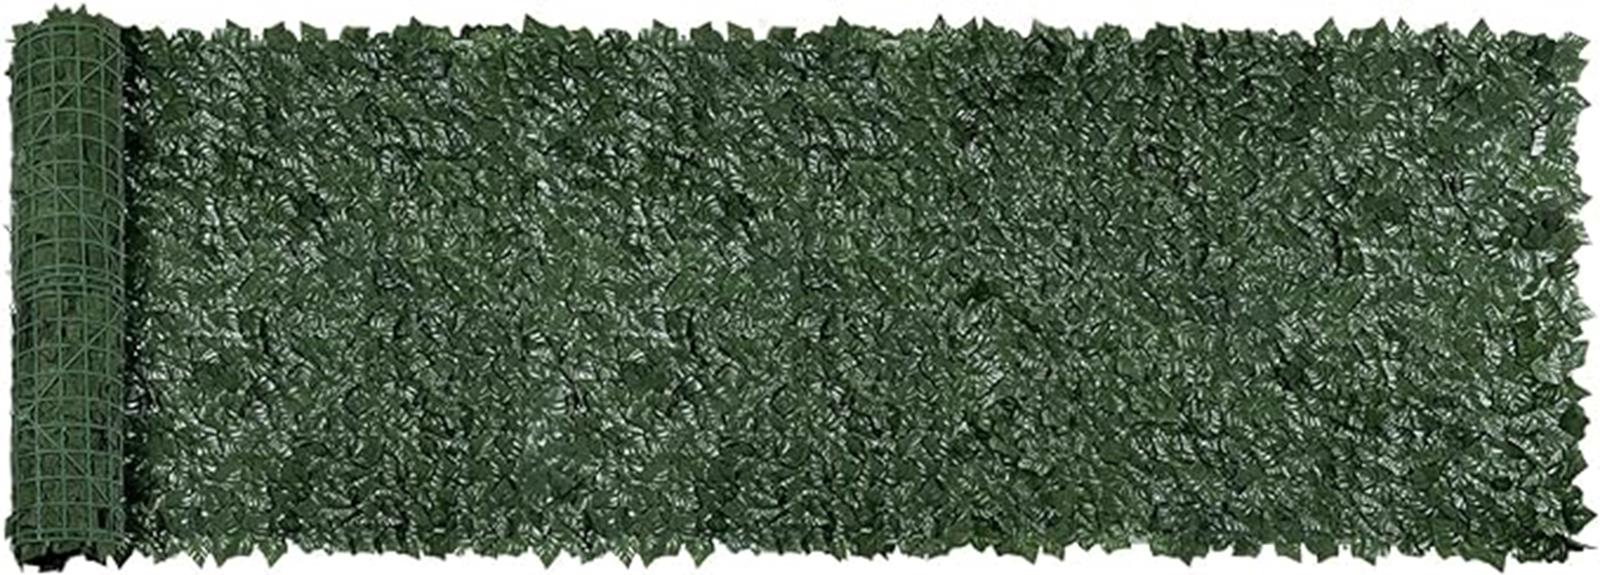 outdoor artificial ivy fence